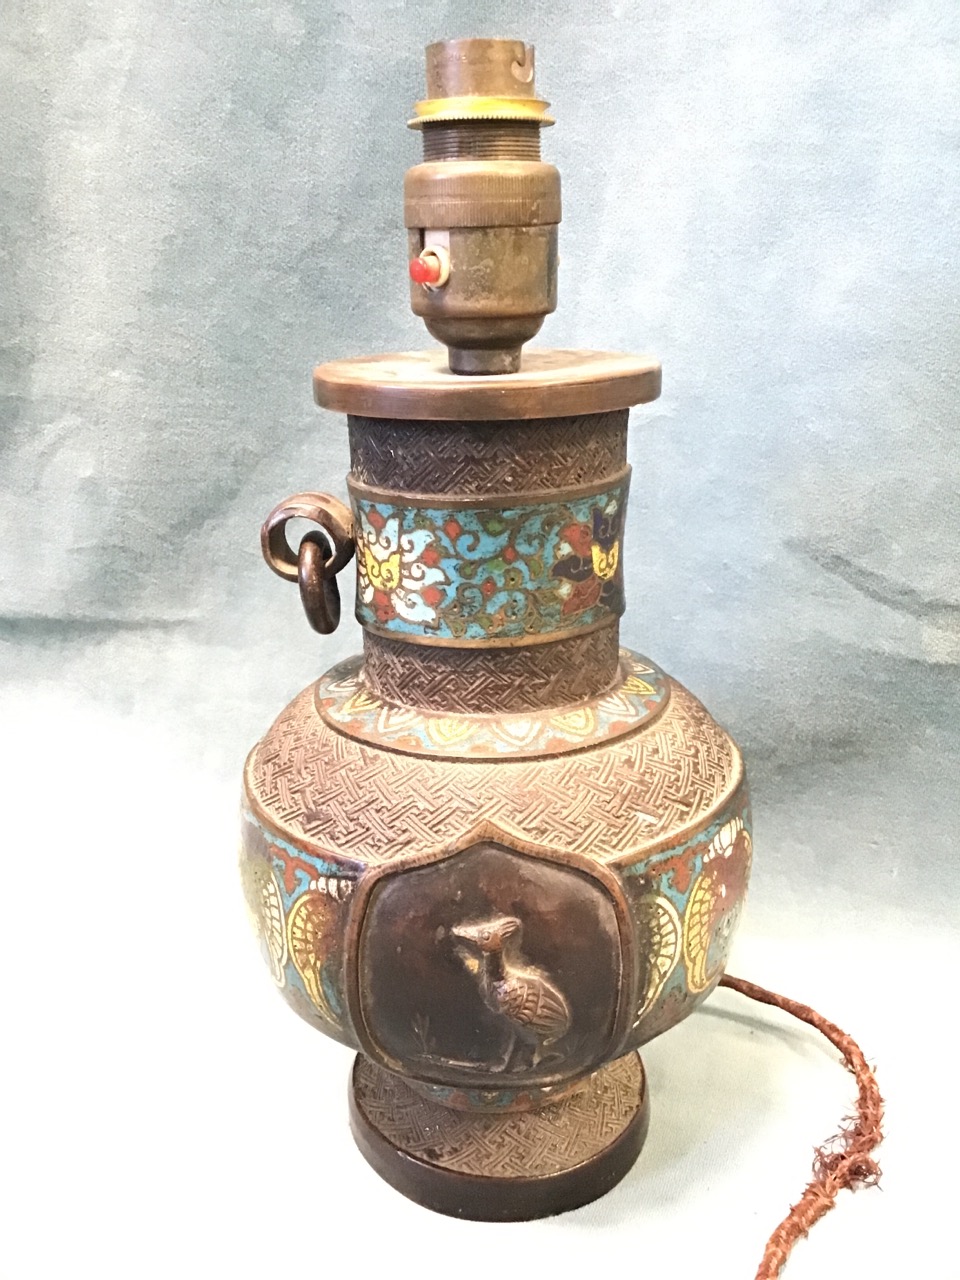 A nineteenth century bronze cloisonné vase converted to a tablelamp, with three bands of stylised